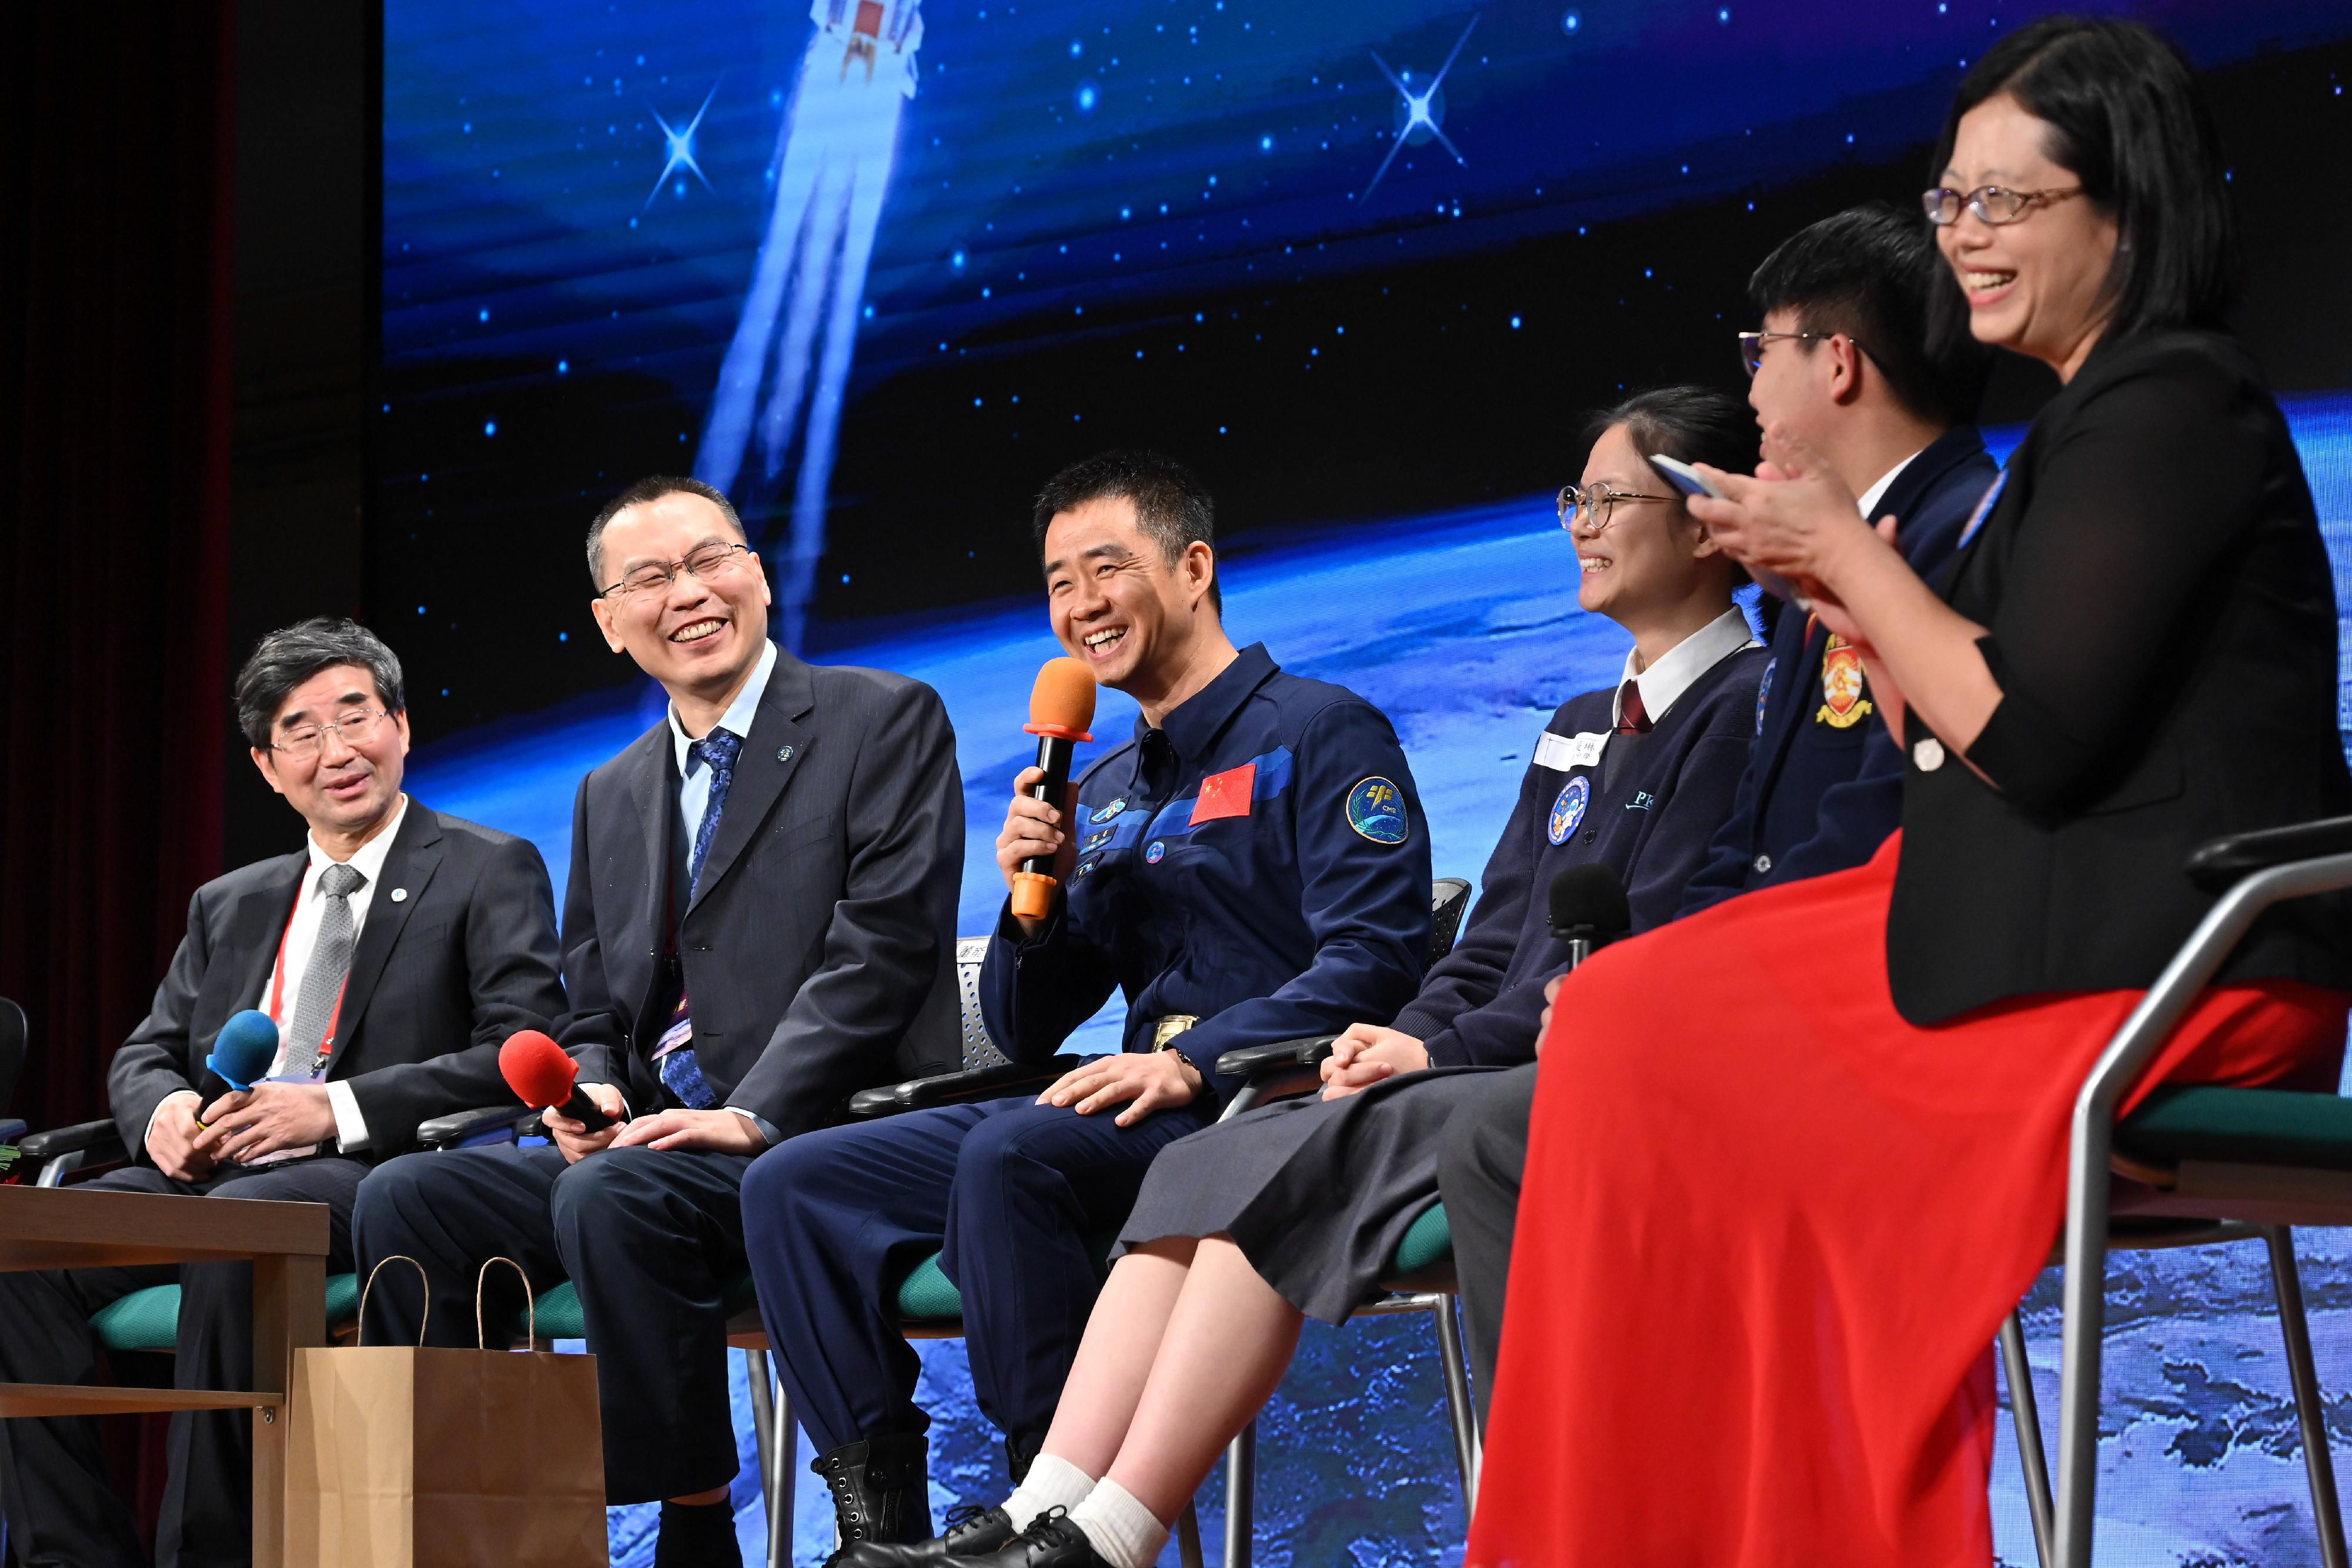 The China Manned Space delegation continued their visit in Hong Kong today (November 29). Photo shows (from left) delegation member Mr Gan Keli; Assistant Chief Designer of the China Manned Space Program Mr Dong Nengli; and Shenzhou-14 mission commander Mr Chen Dong, attending a dialogue session with students at Pui Kiu Middle School.